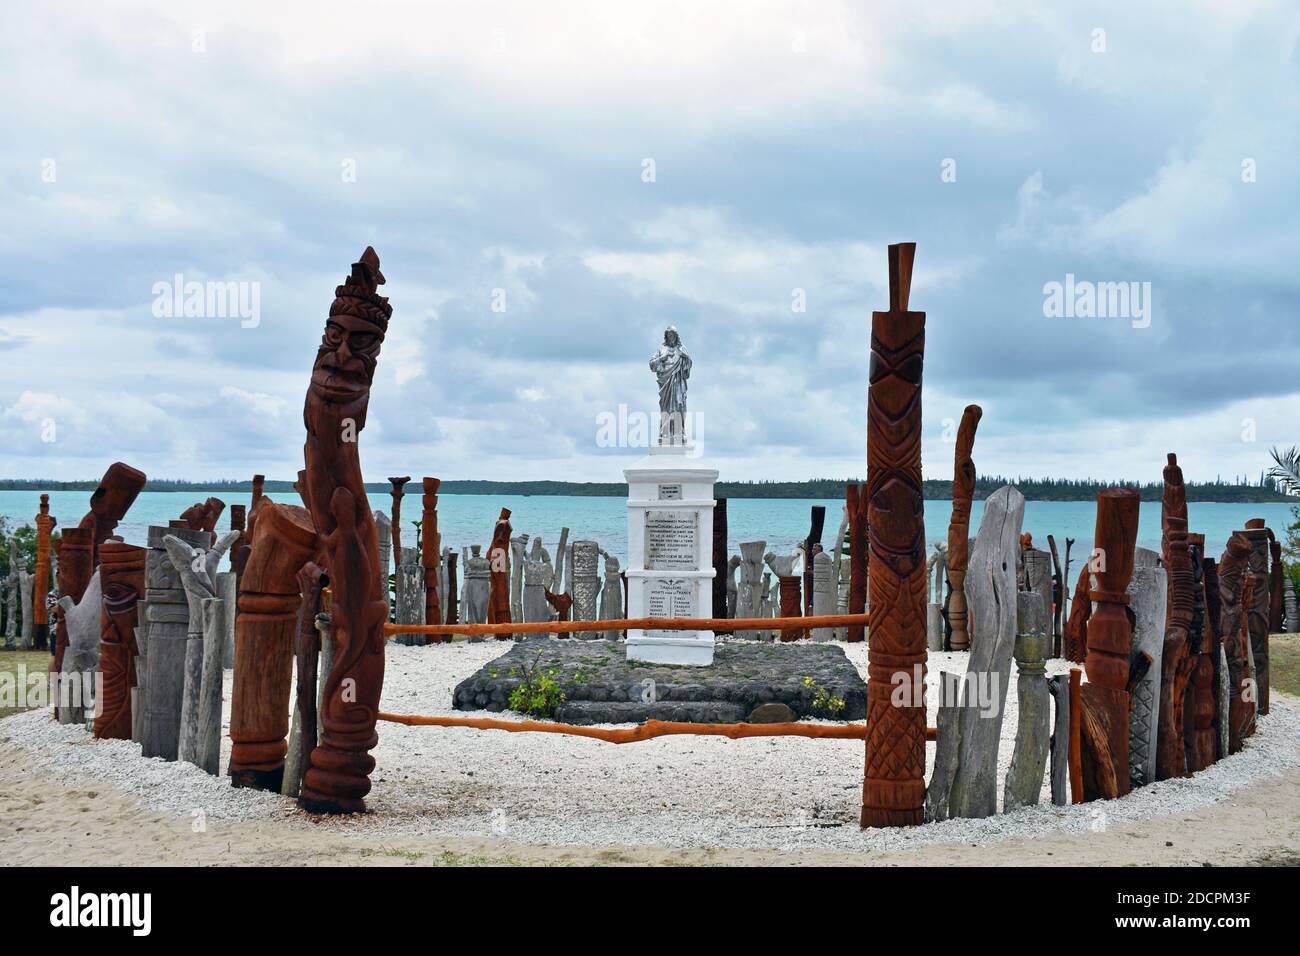 A sculpture of Saint-Maurice in Vao, Isle of Pines, New Caledonia.  The statue is surrounded by a fence made of carved wooden totems. Stock Photo